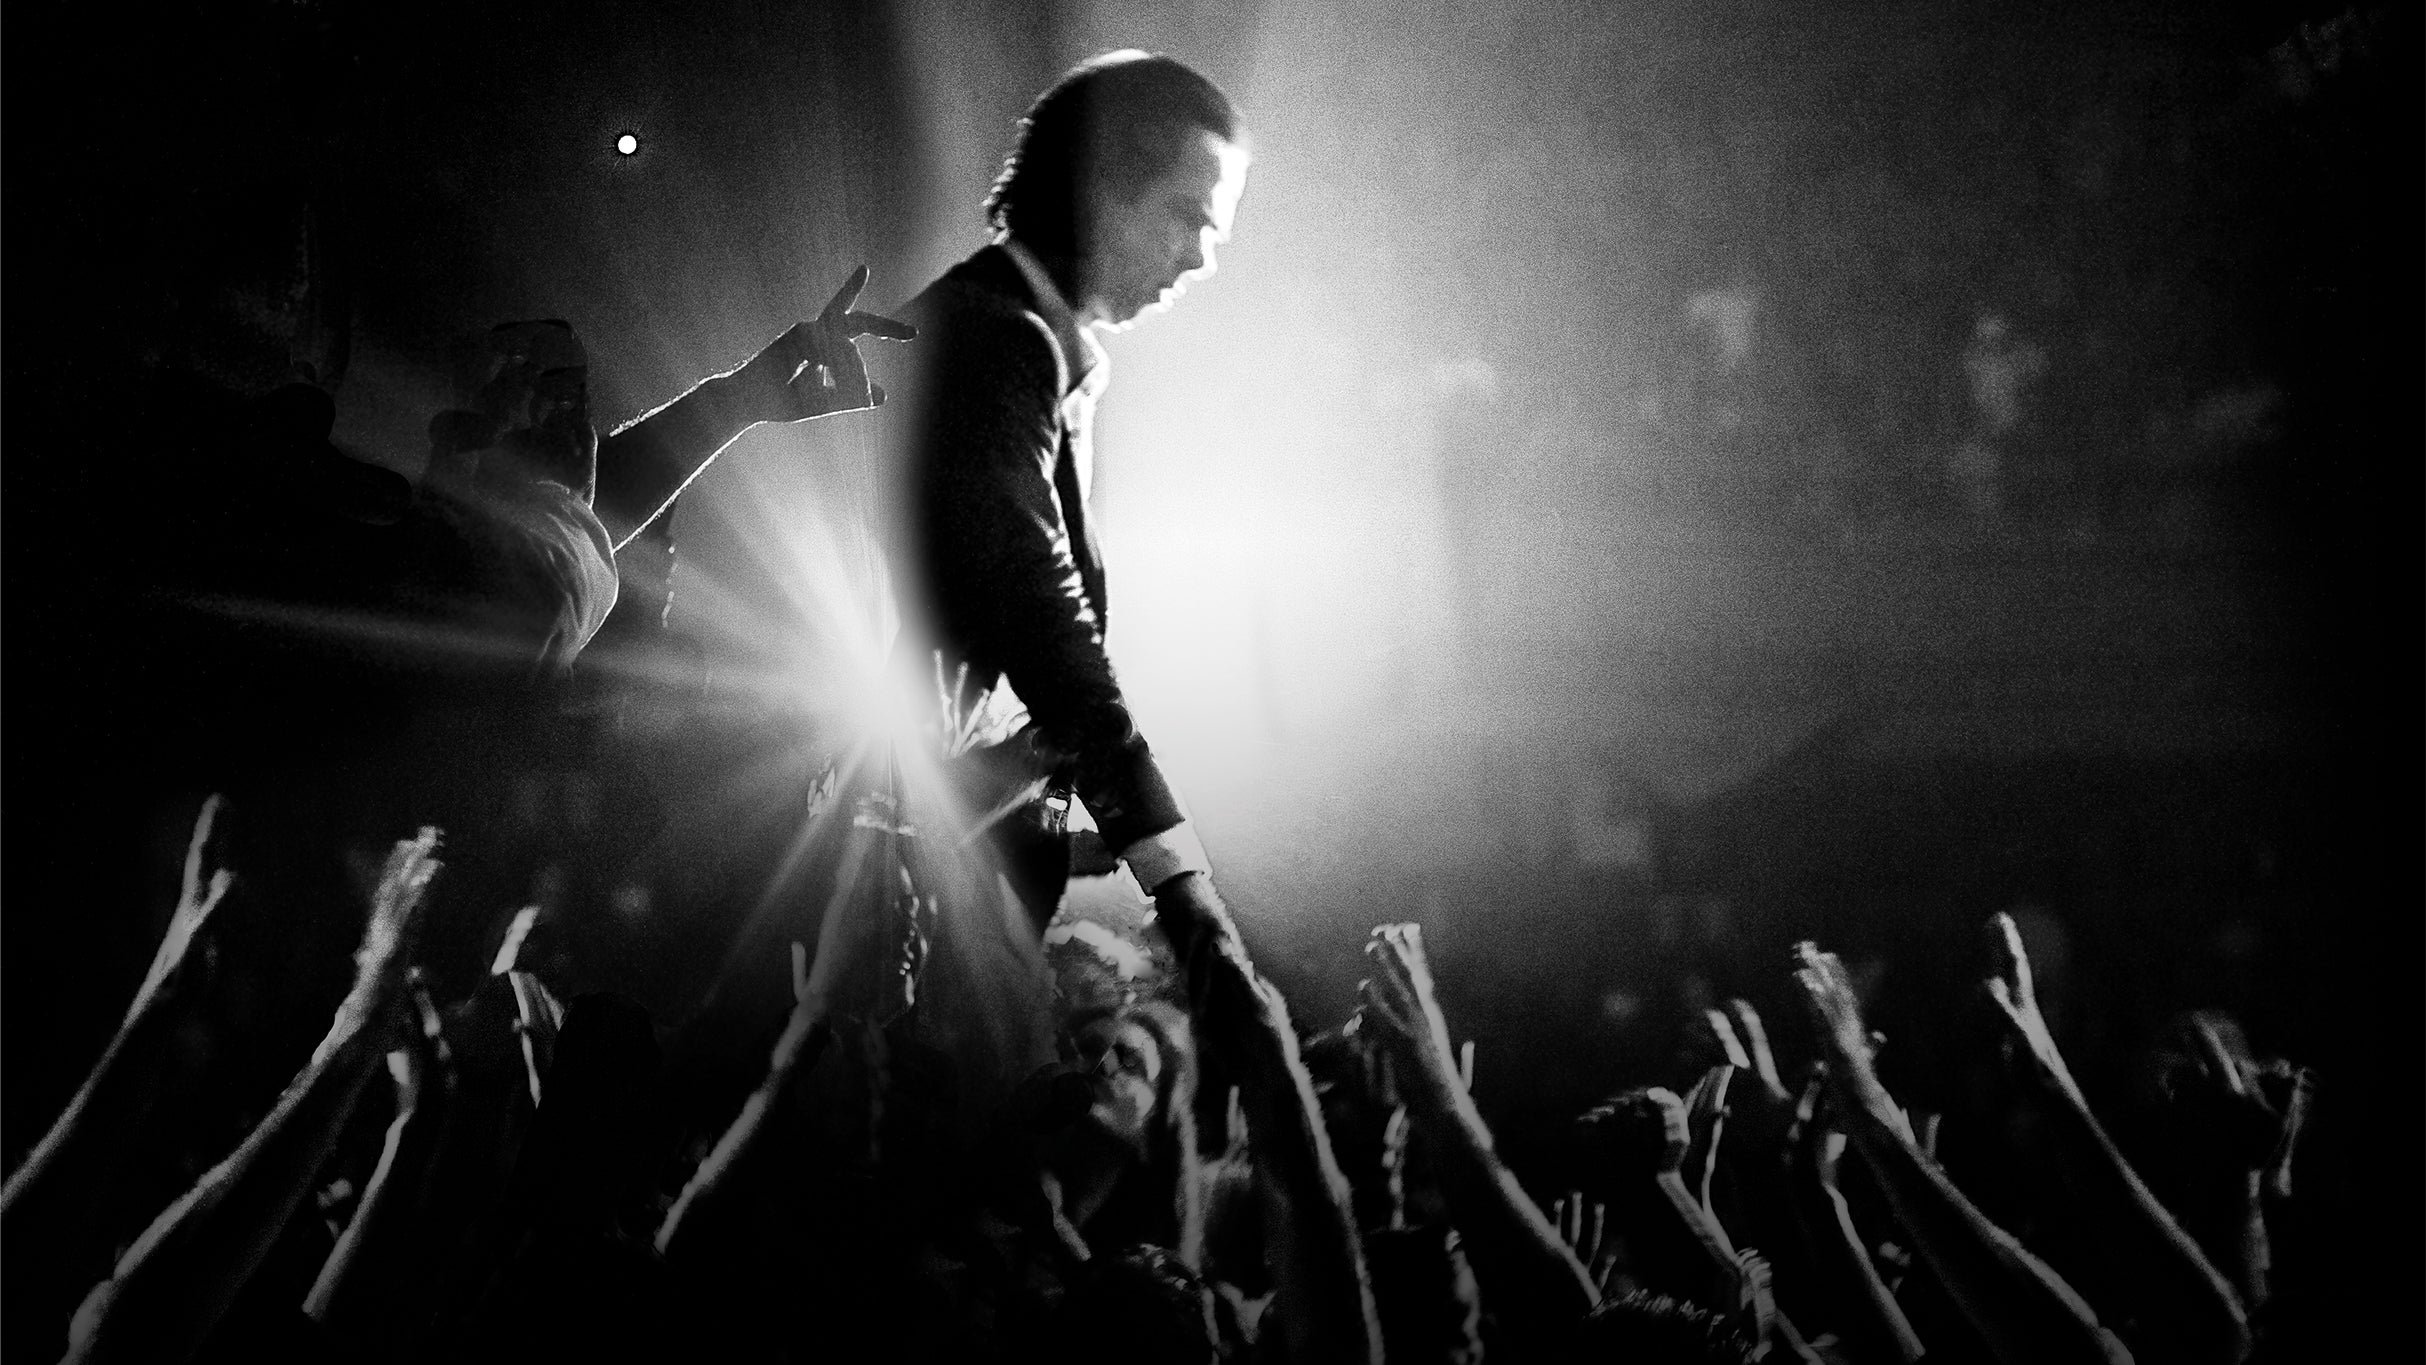 Nick Cave & the Bad Seeds:The Wild God Tour in Leeds promo photo for Spotify presale offer code